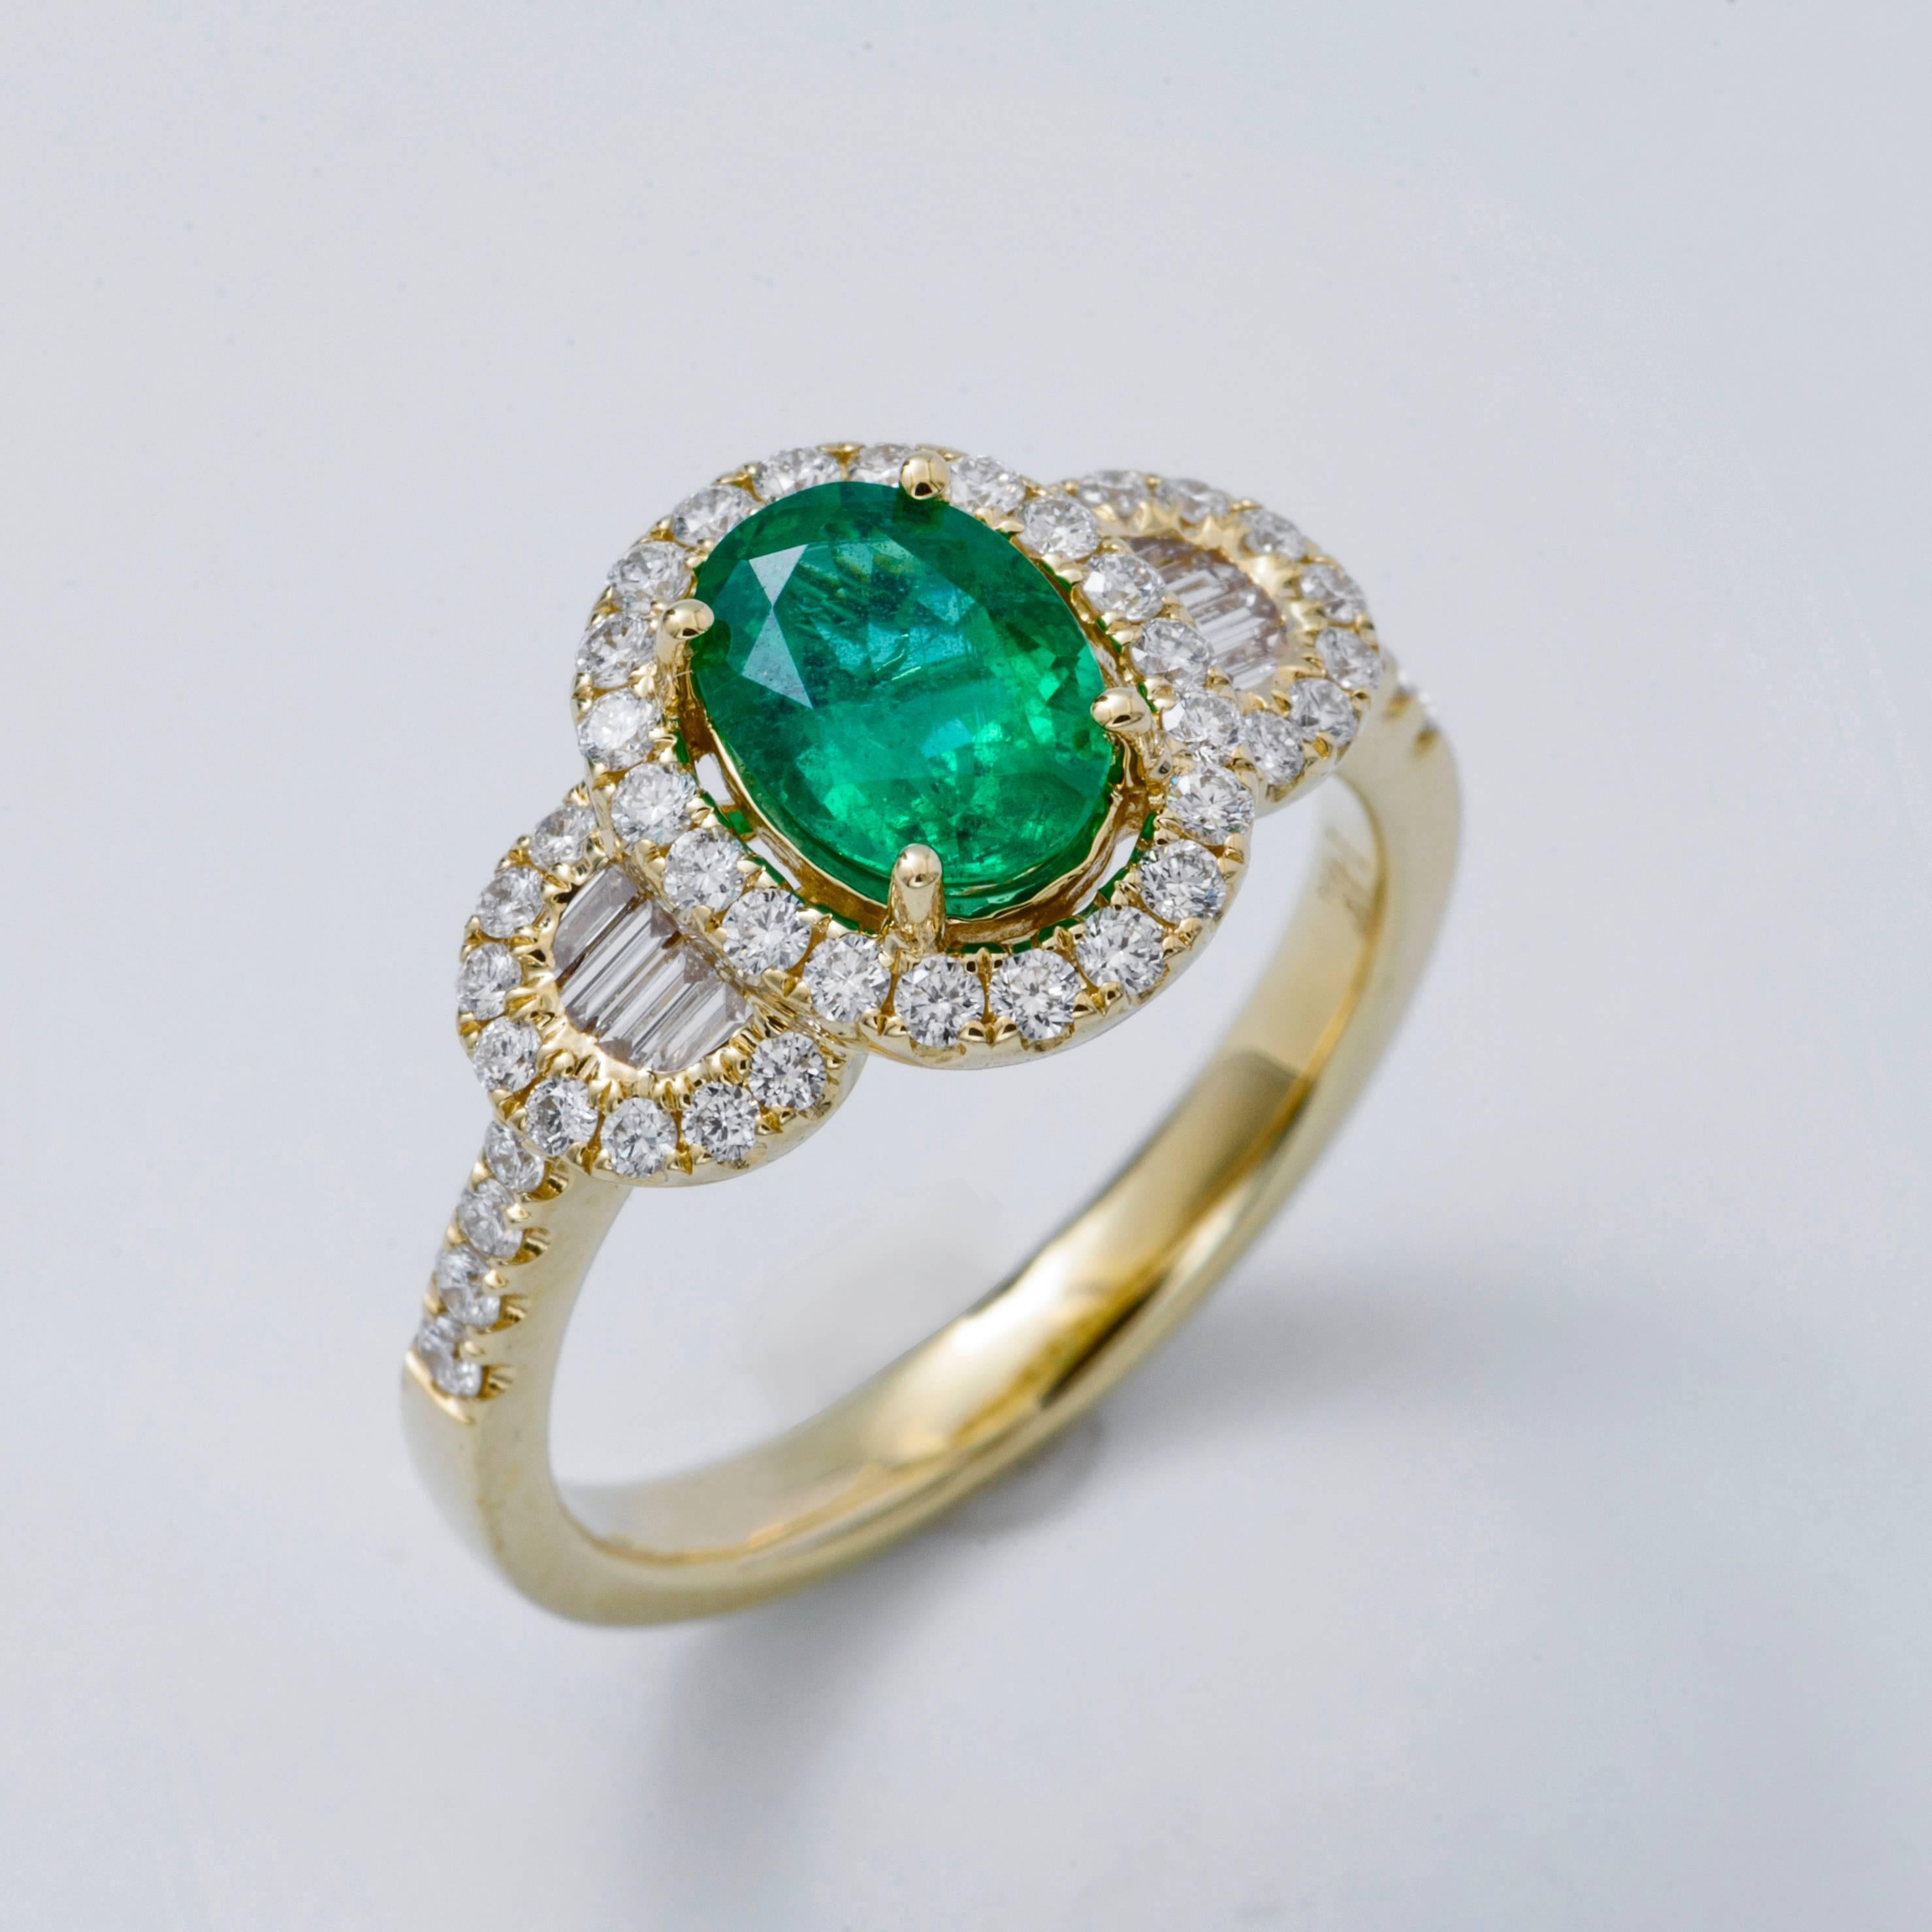 Style:  White Oval Shape Zambian Emerald Diamond Halo Engagement Ring
Material: 14 k Yellow Gold
Gemstone Details: 1 Oval Shape Emerald approximately 1.03 ct. 8x6 mm
Diamond Details: Approximately 0.58 ctw of diamonds. Diamonds are G/H in color and